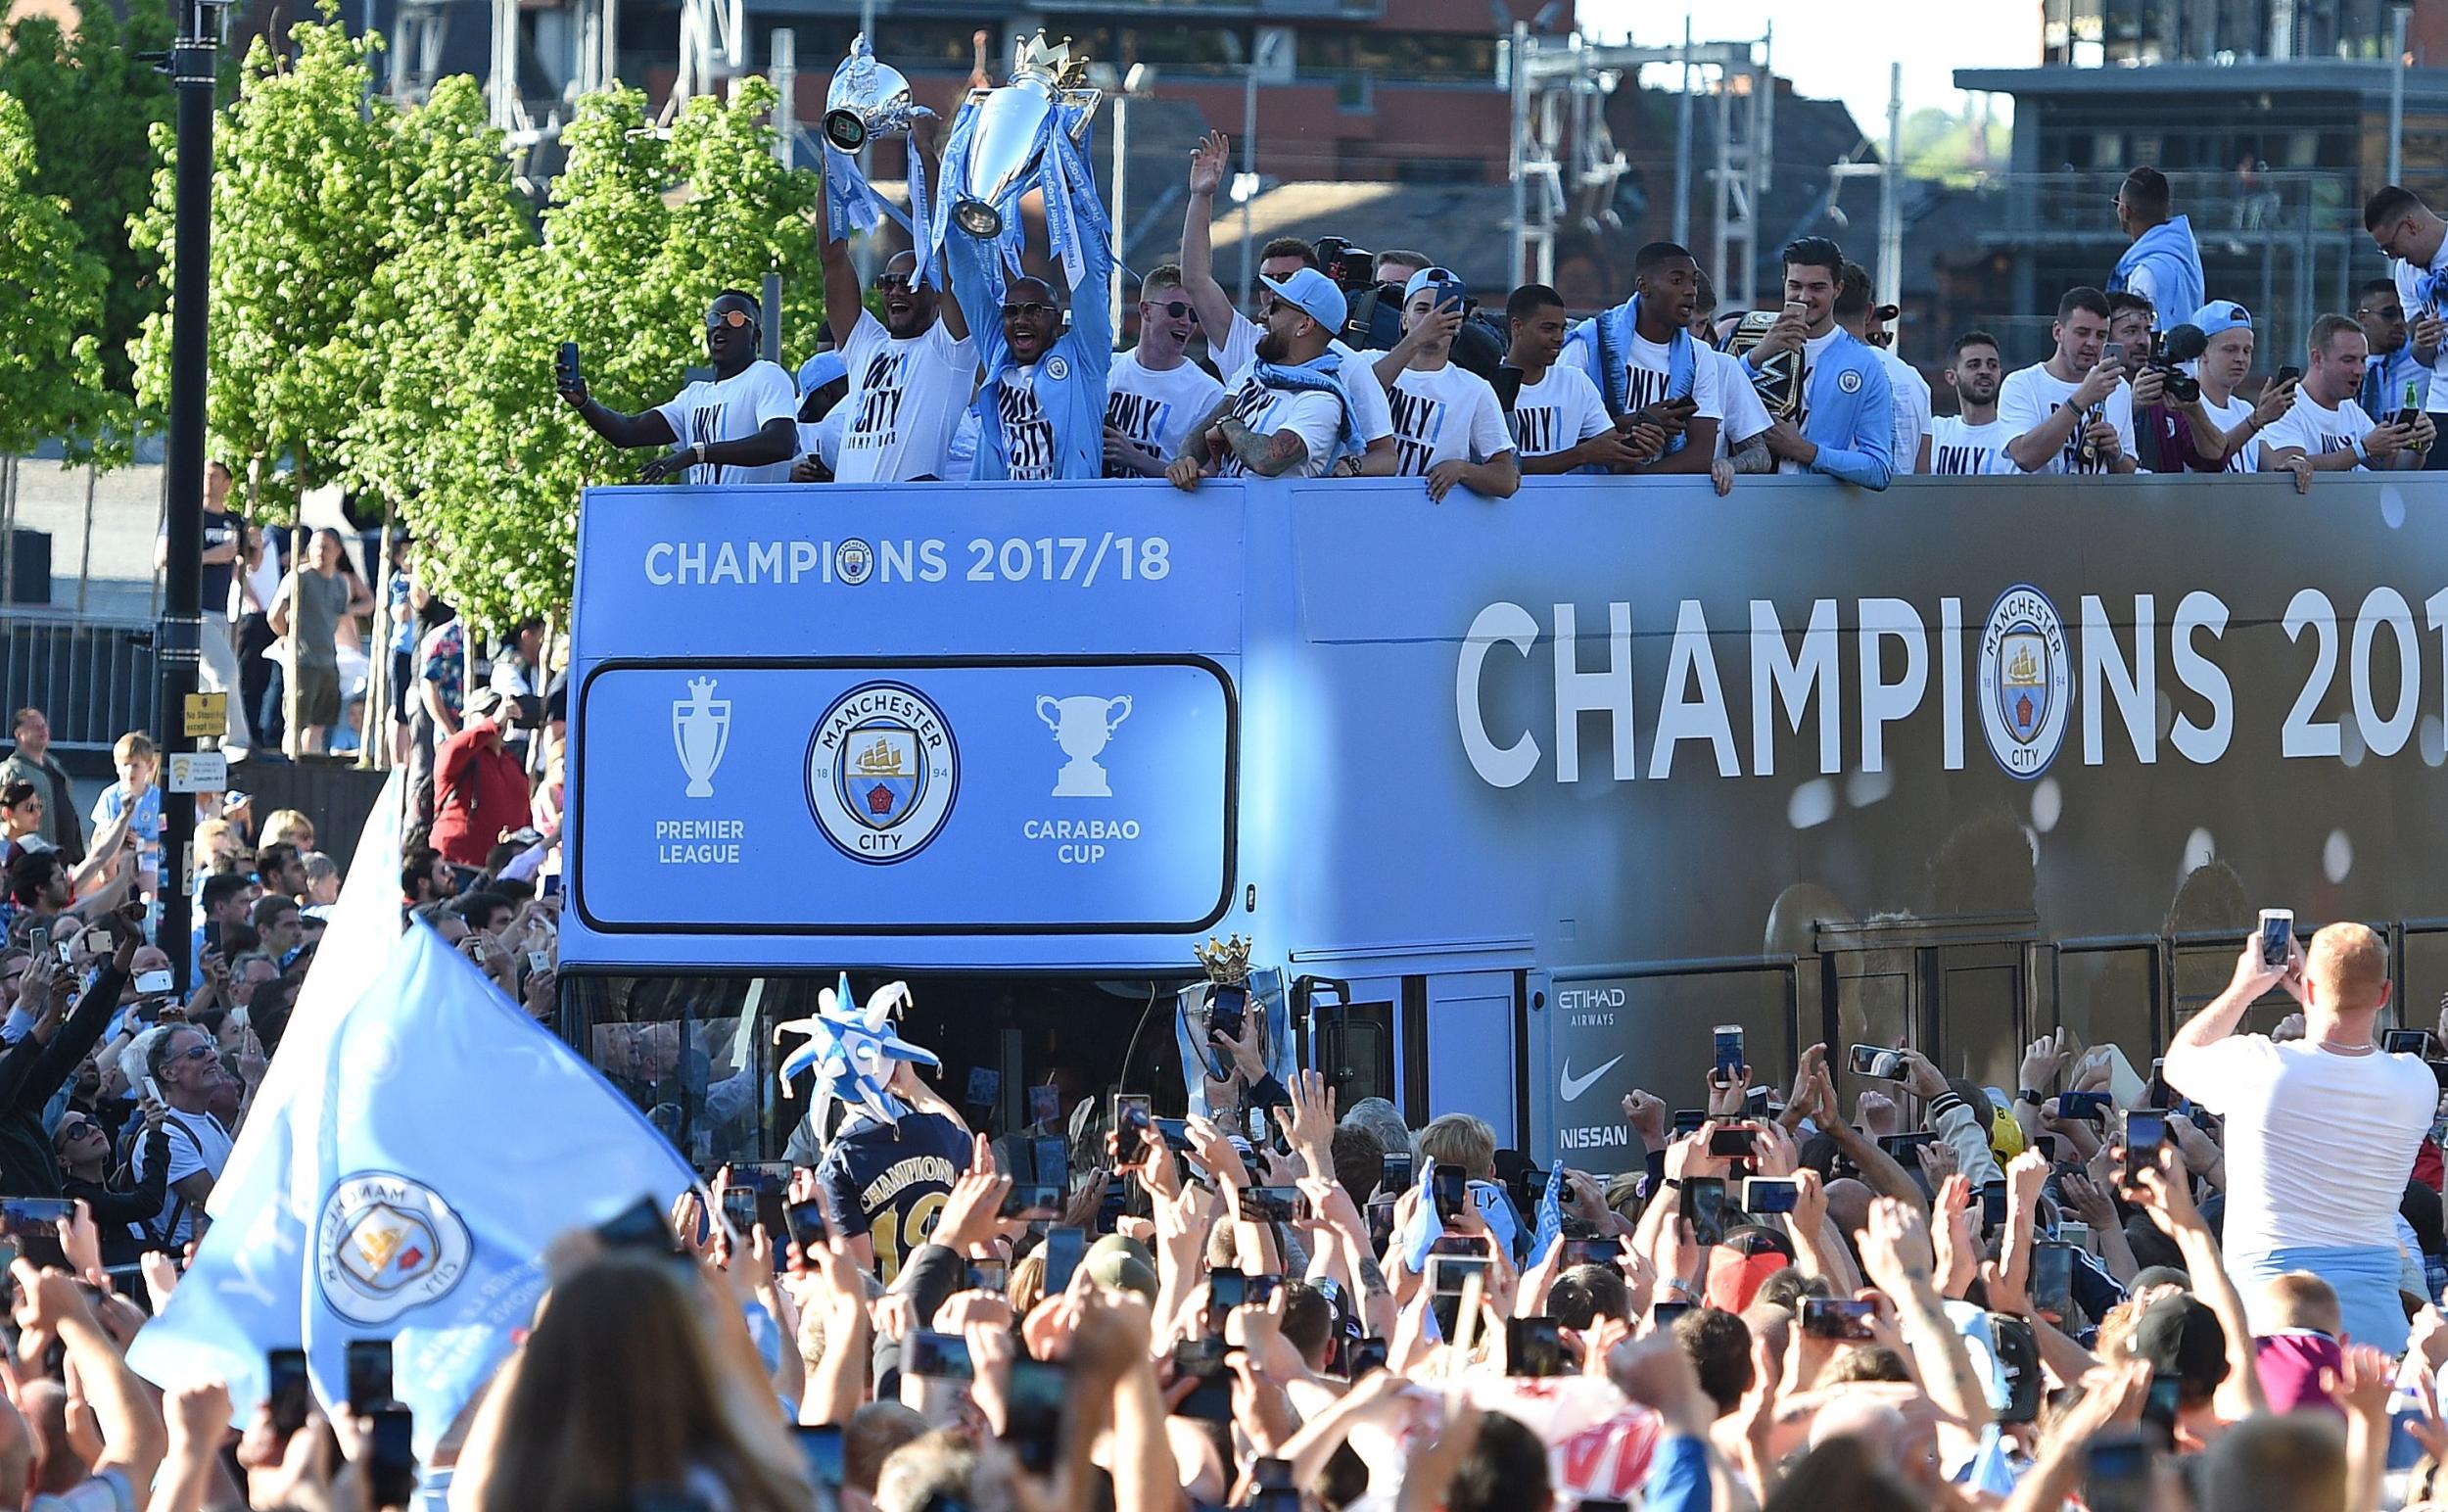 Thousands lined the streets of Manchester for a bus parade